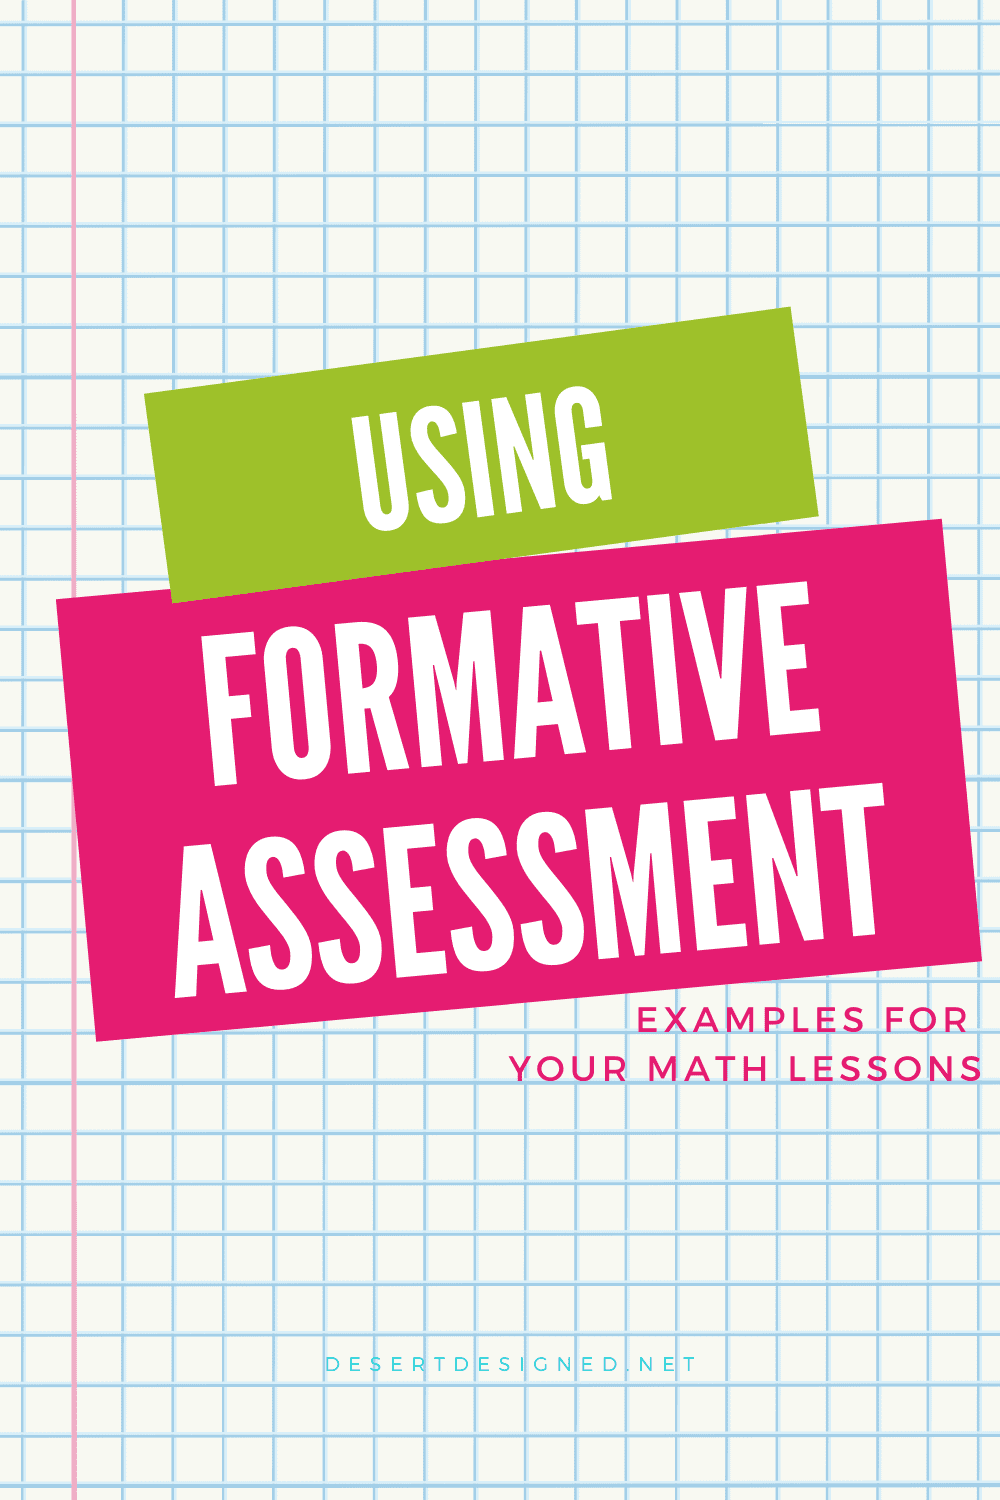 importance of formative assessment essay